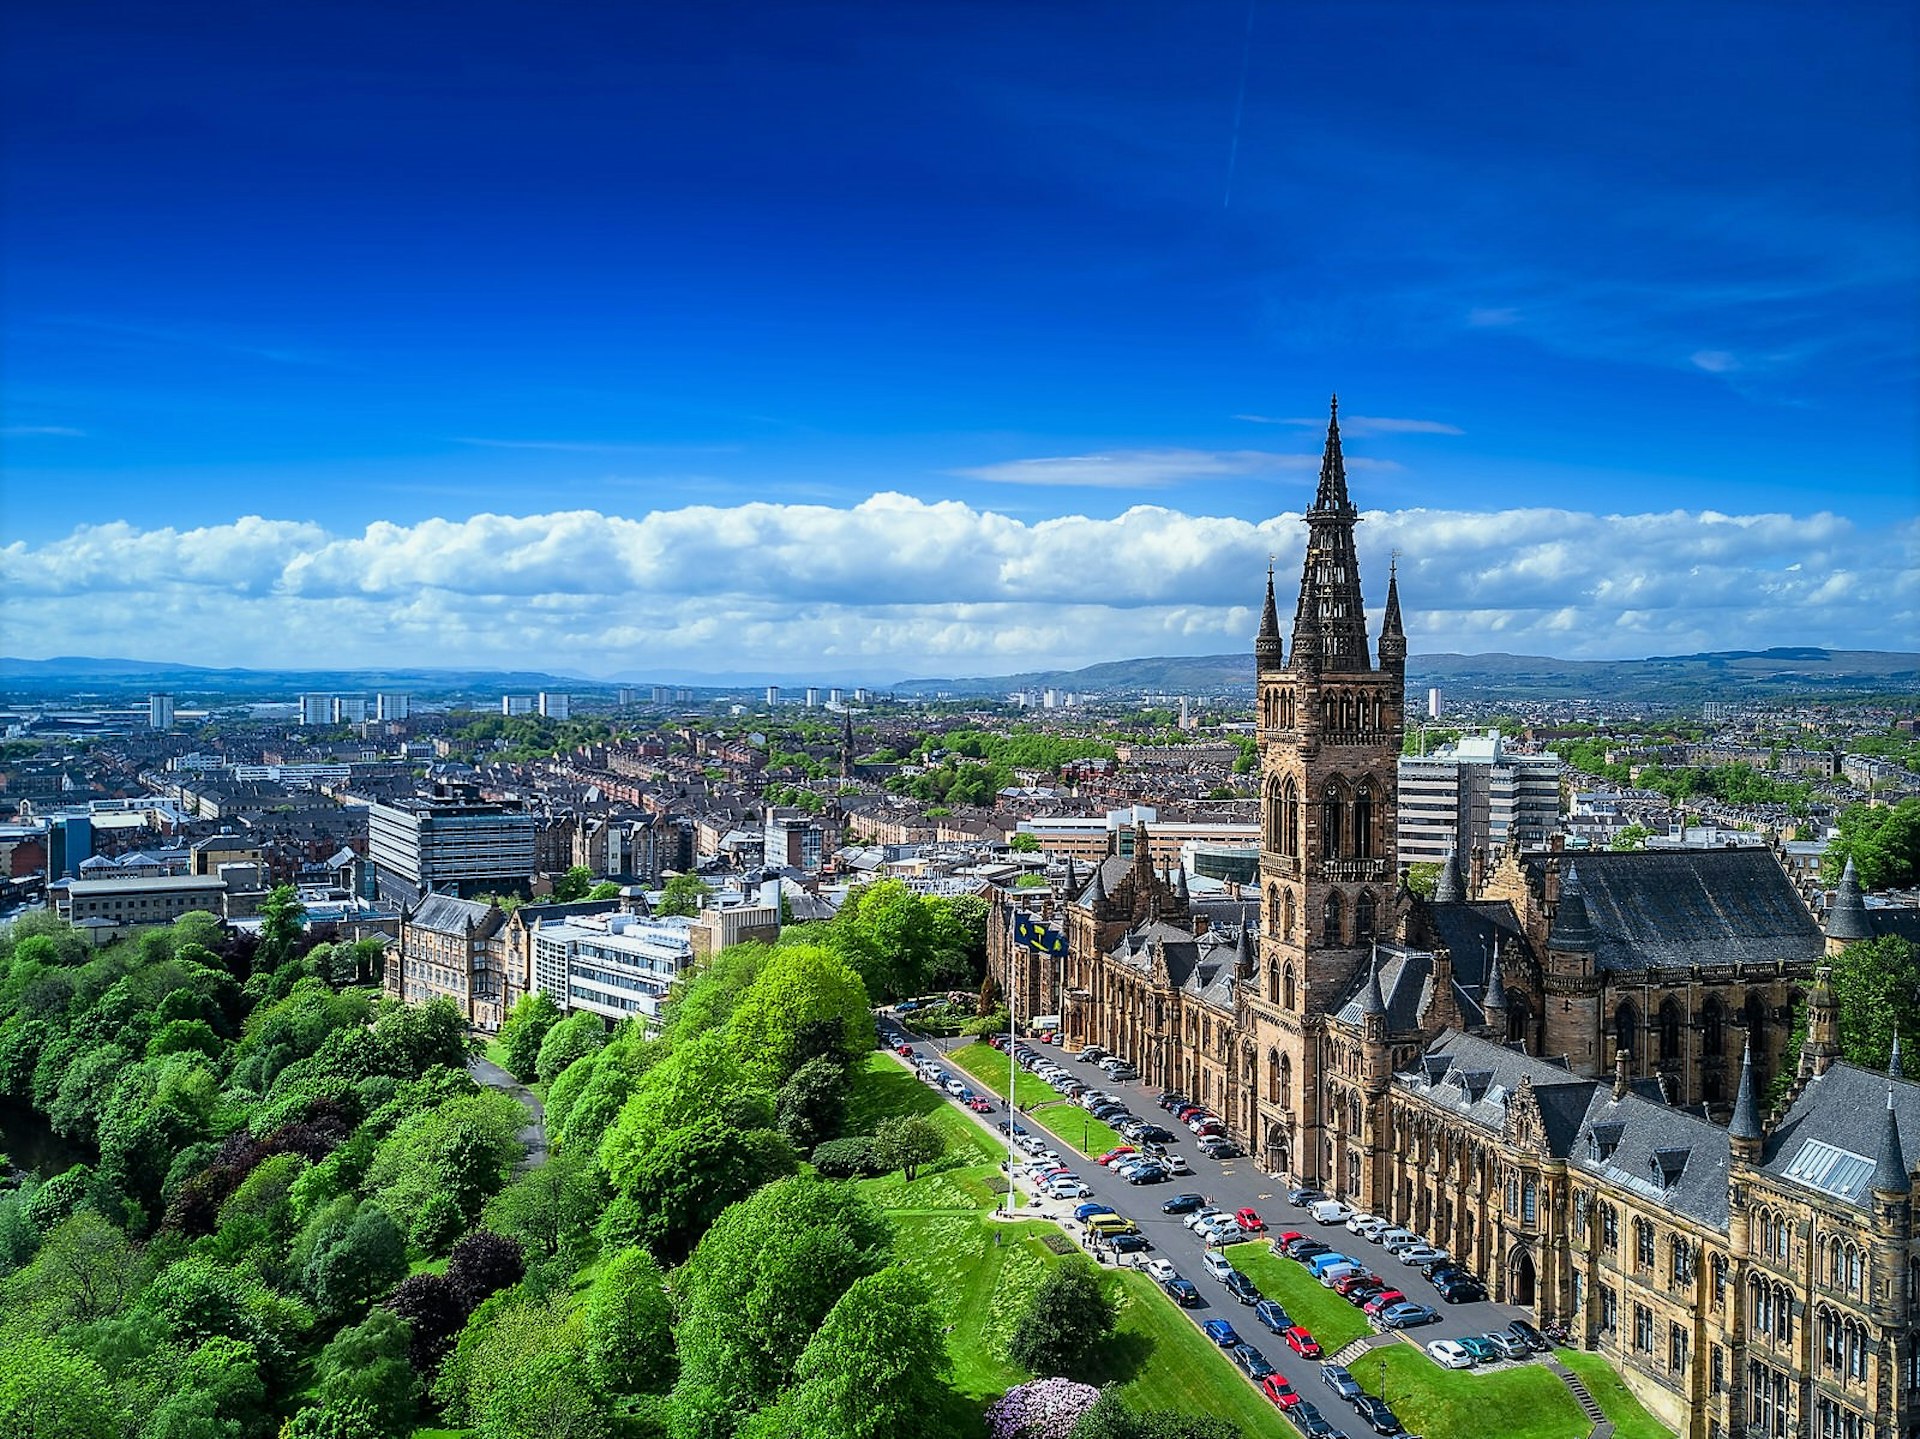 The gothic architecture of Glasgow University is a prominent feature of the city's skyline